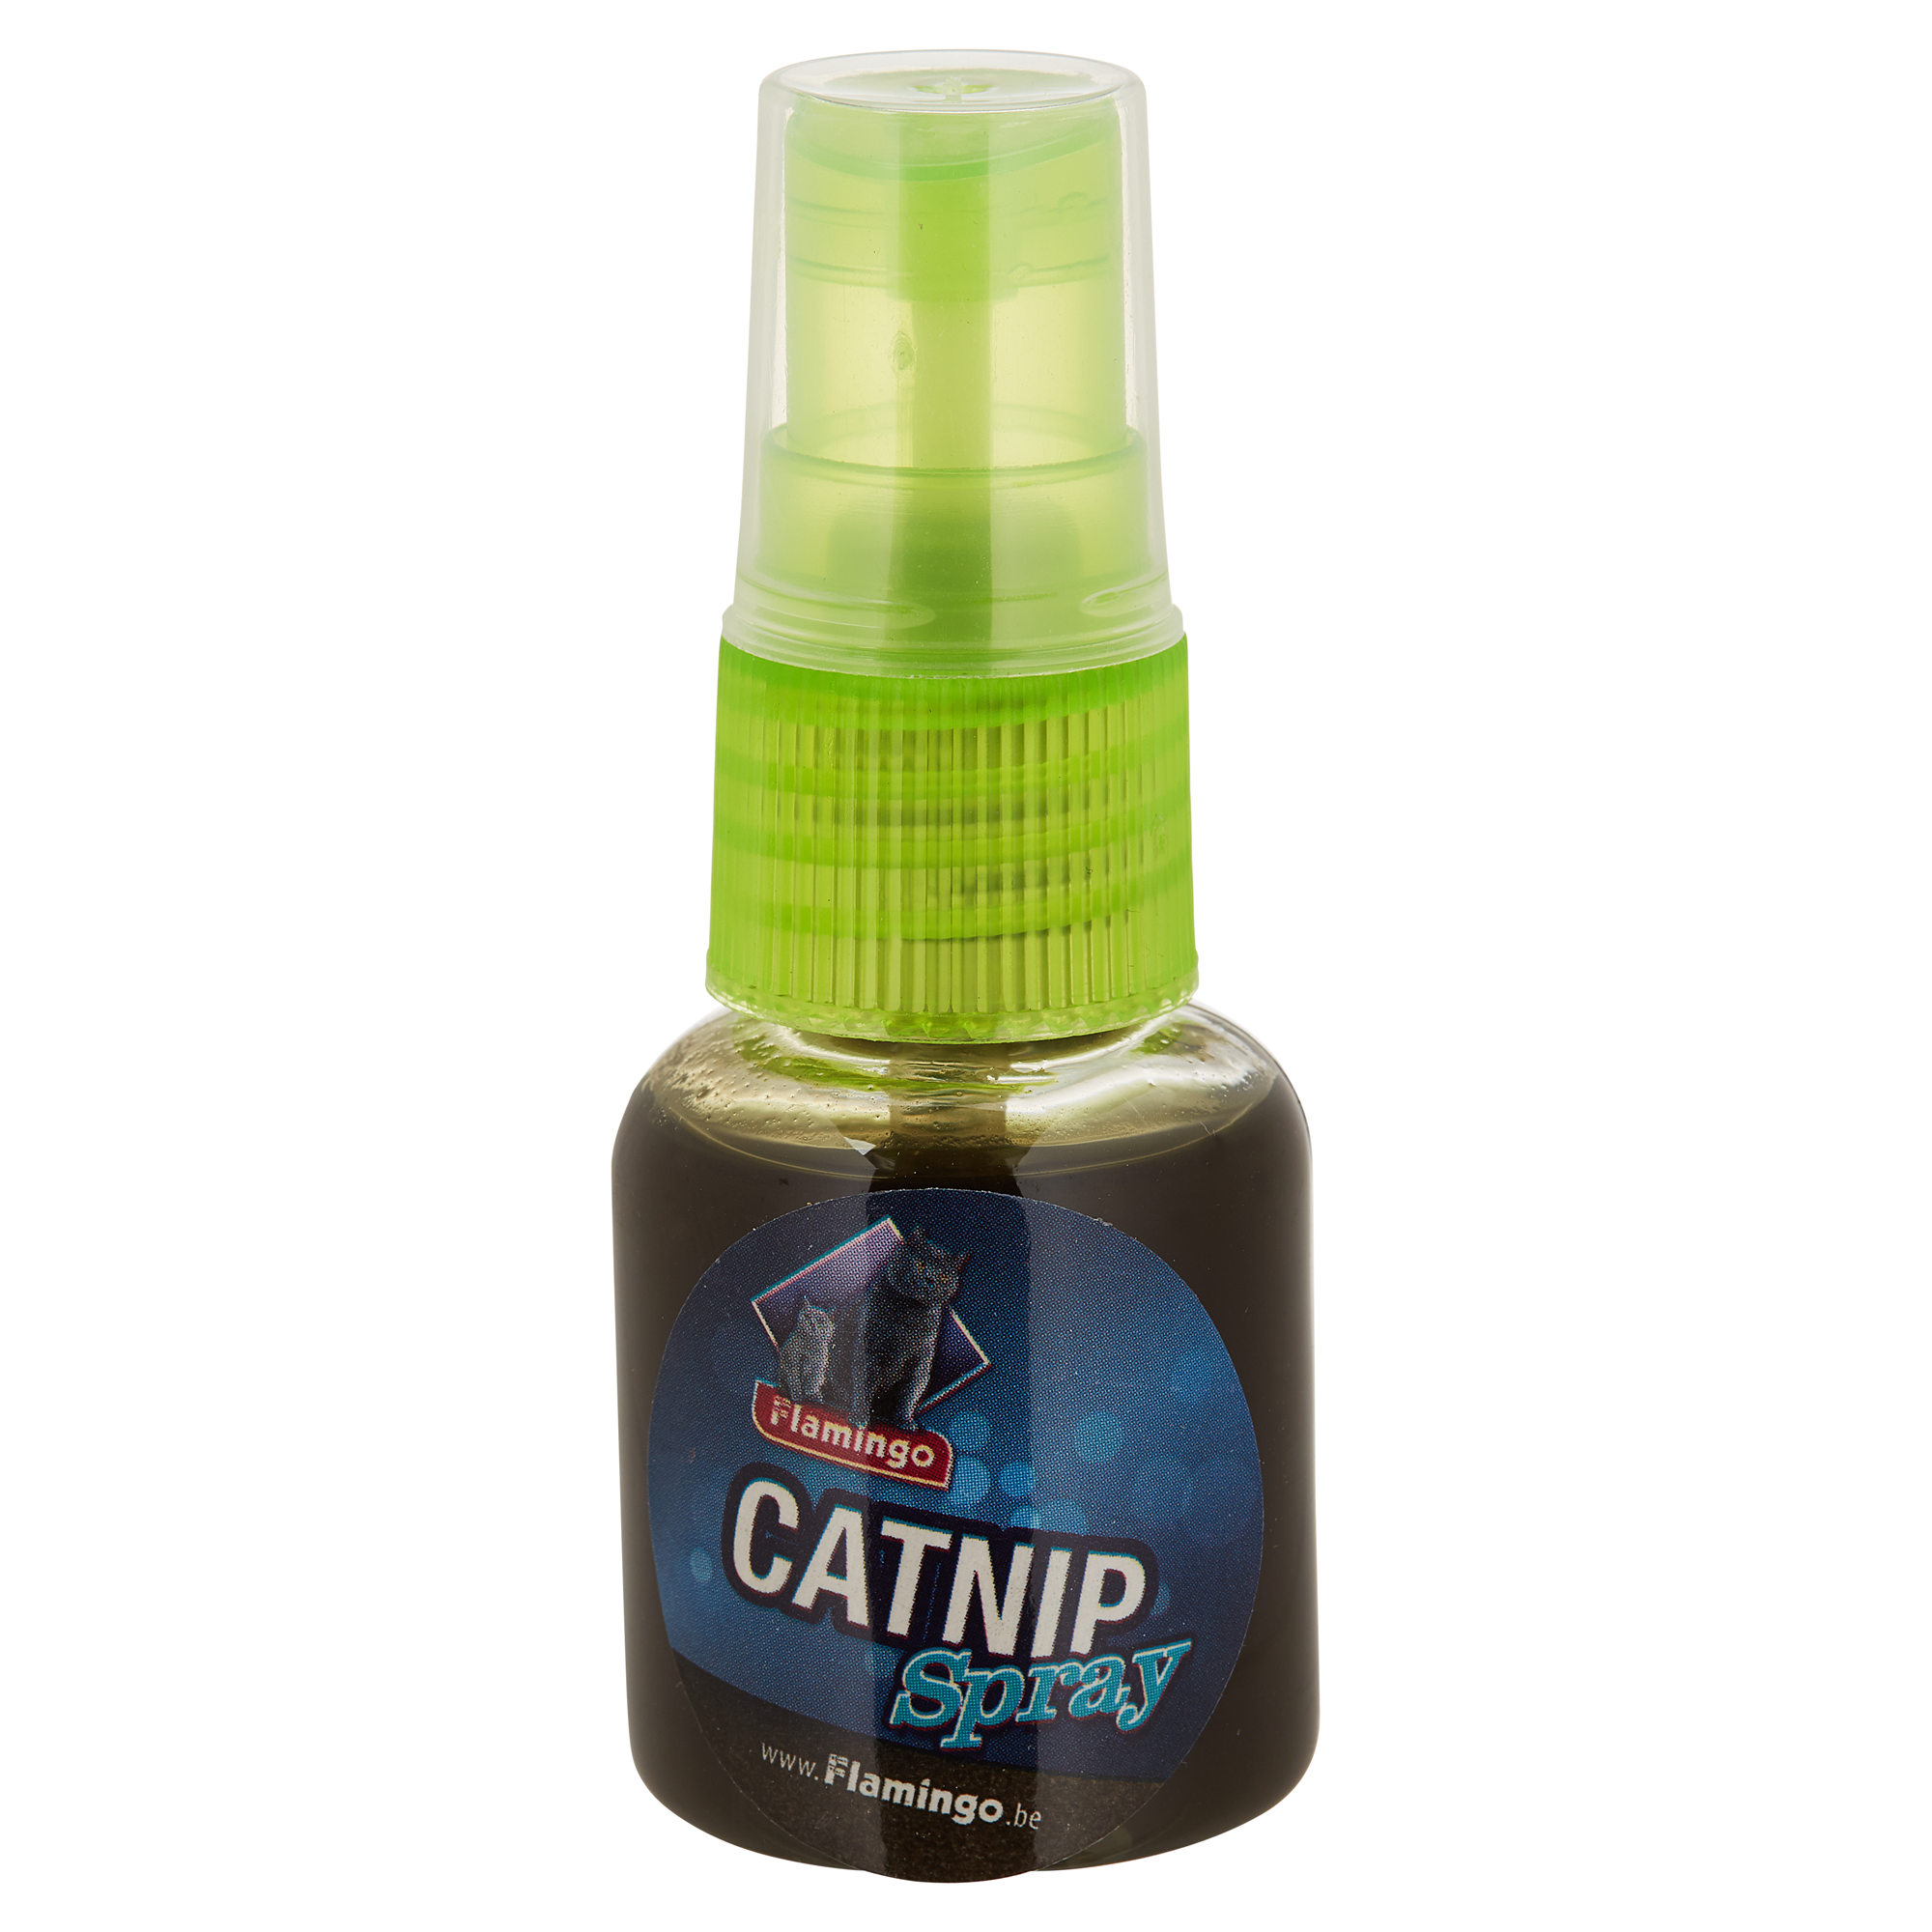 Duftspray "Catnip Spray" 25 ml + product picture